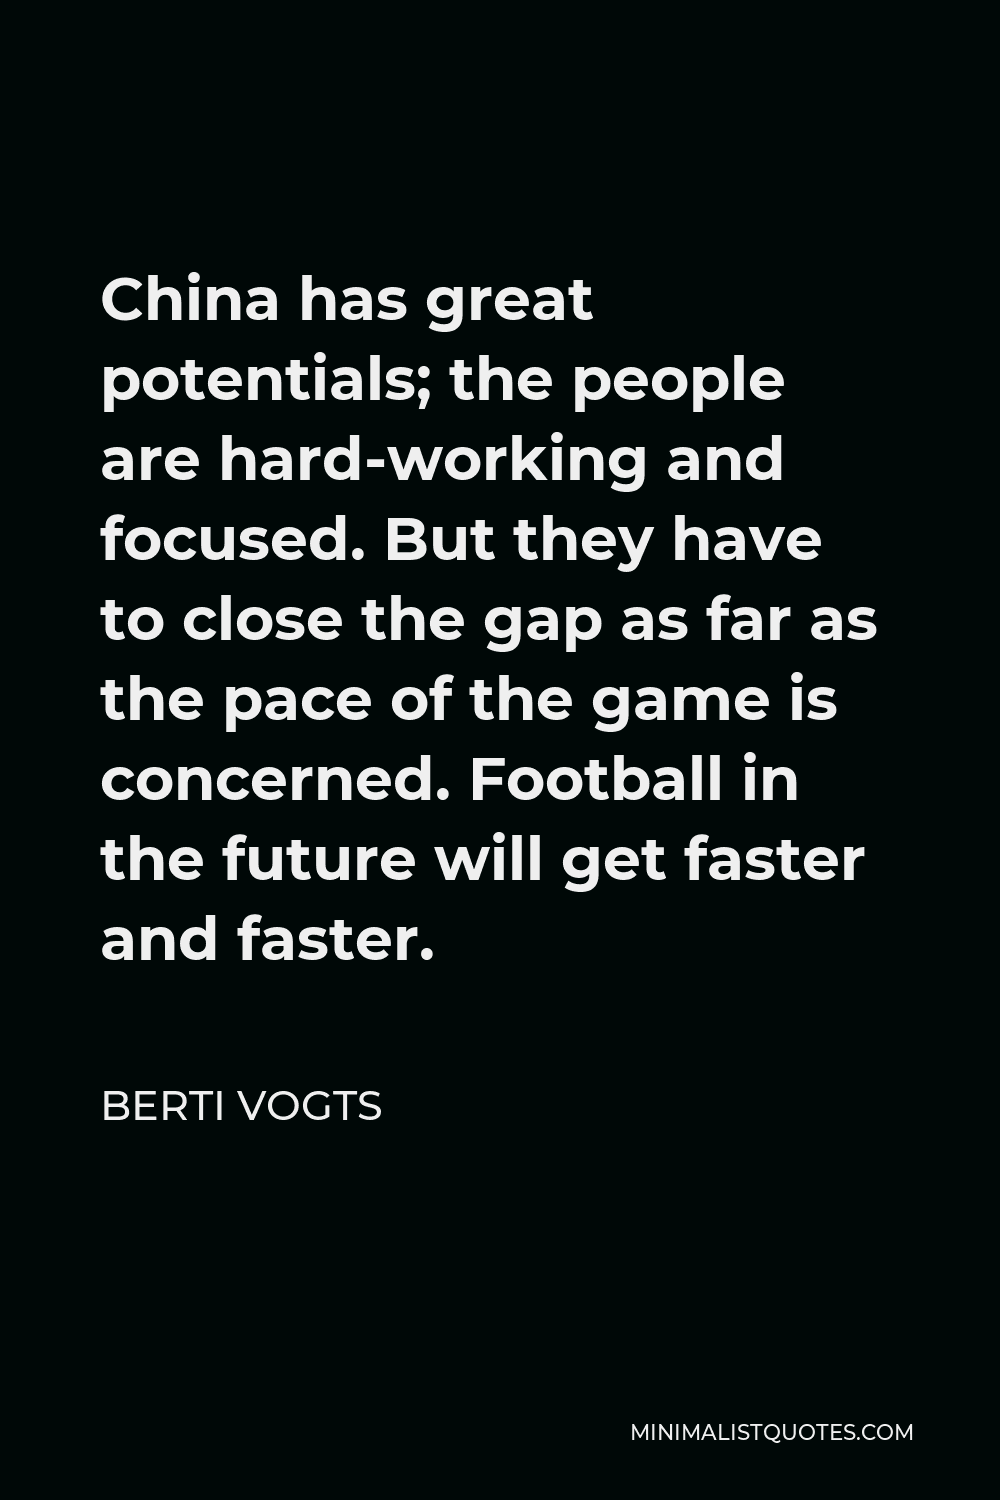 Berti Vogts Quote - China has great potentials; the people are hard-working and focused. But they have to close the gap as far as the pace of the game is concerned. Football in the future will get faster and faster.